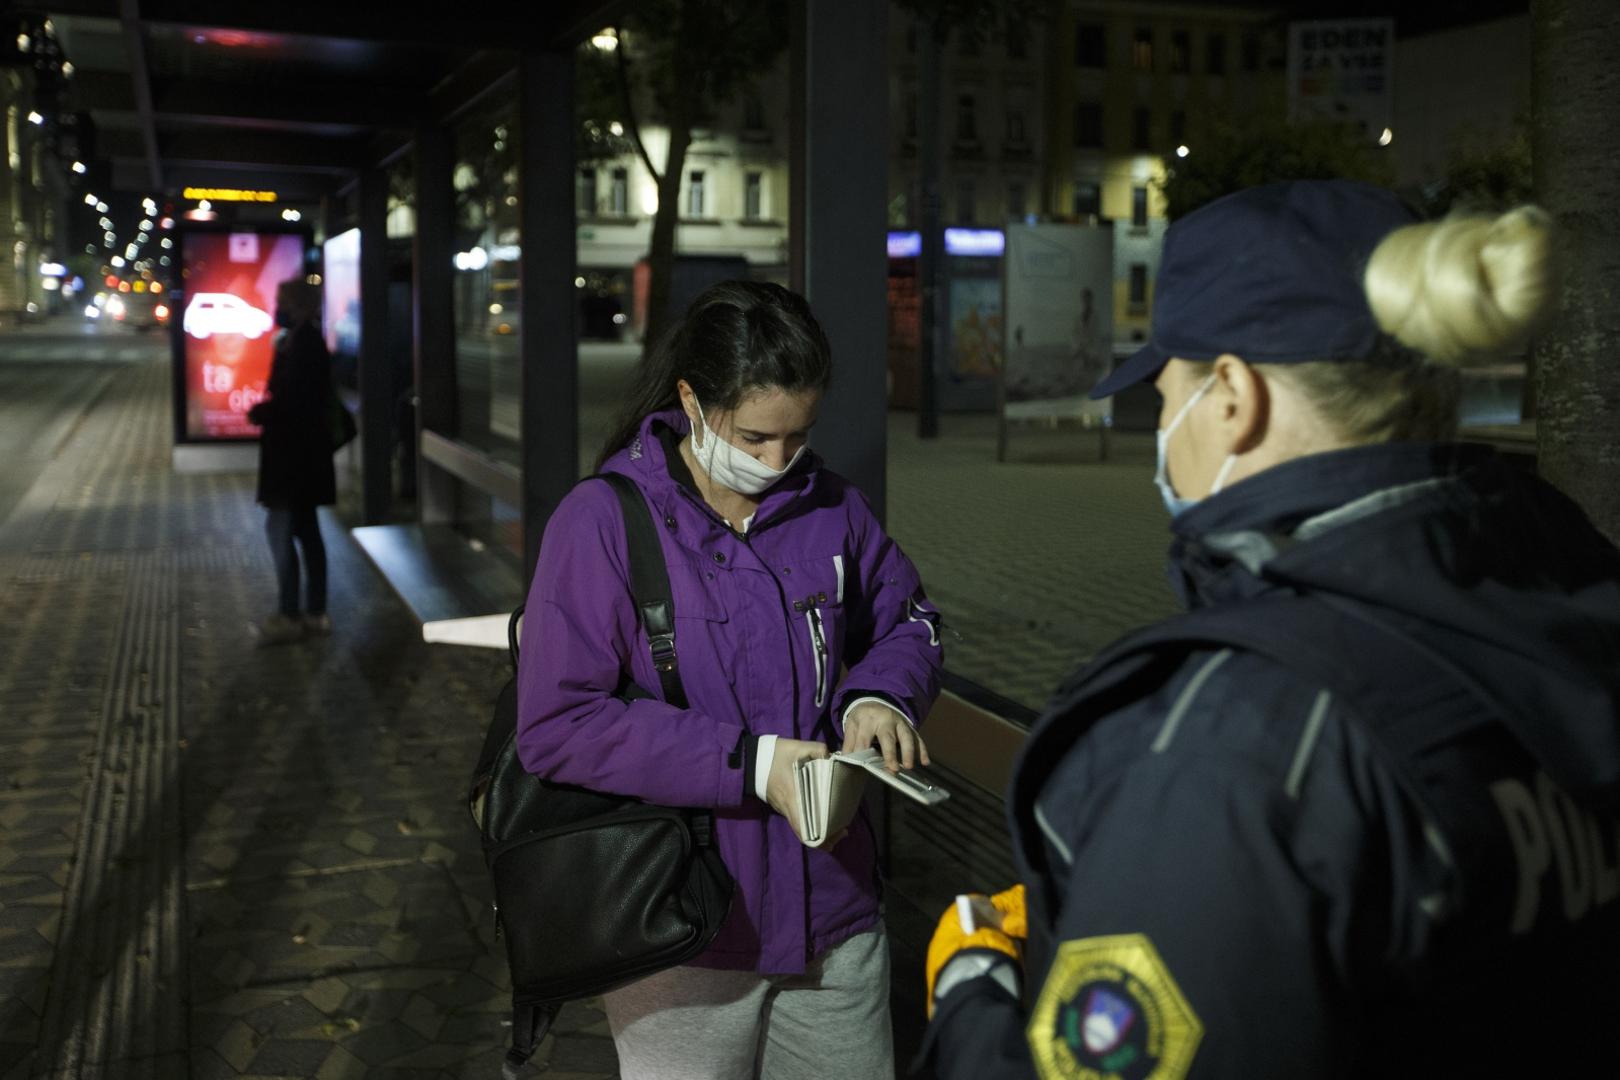 SLOVENIA-LJUBLJANA-COVID-19-CURFEW (201021) -- LJUBLJANA, Oct. 21, 2020 (Xinhua) -- Police officer checks the documents of a woman in Ljubljana, Slovenija, Oct. 20, 2020. Slovenia registered its record daily number of COVID-19 cases -- 1,504, bringing the total number of coronavirus cases to 15,983 in the country, according to official figures released on Wednesday.
   The new surge came as a series of new restrictions have come into effect, including a curfew between 9 p.m. and 6 a.m. as of Tuesday, the ban on movement among statistical regions, the ban on gatherings of more than six people. (Photo by Zeljko Stevanic/Xinhua) Zeljko Stevanic  Photo: XINHUA/PIXSELL